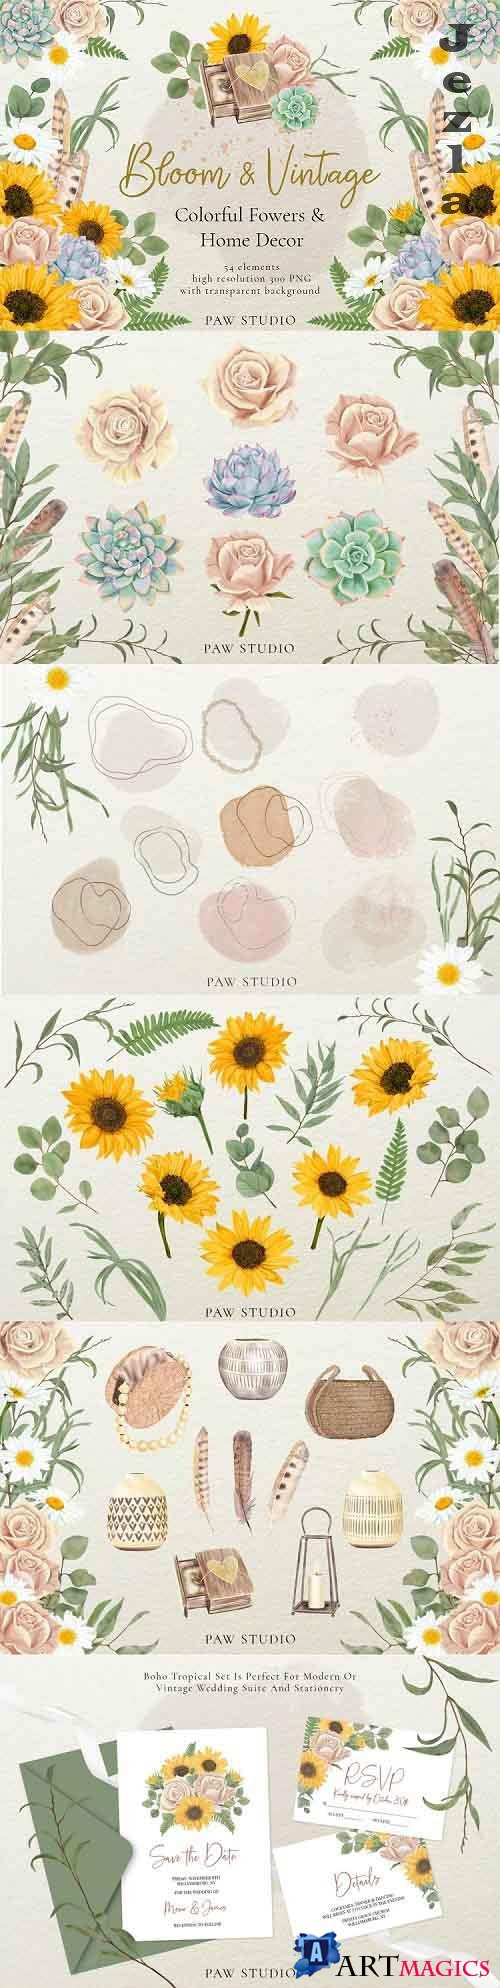 Bloom & Vintage Graphic. Flowers, Leaves, Home Decor - 593186